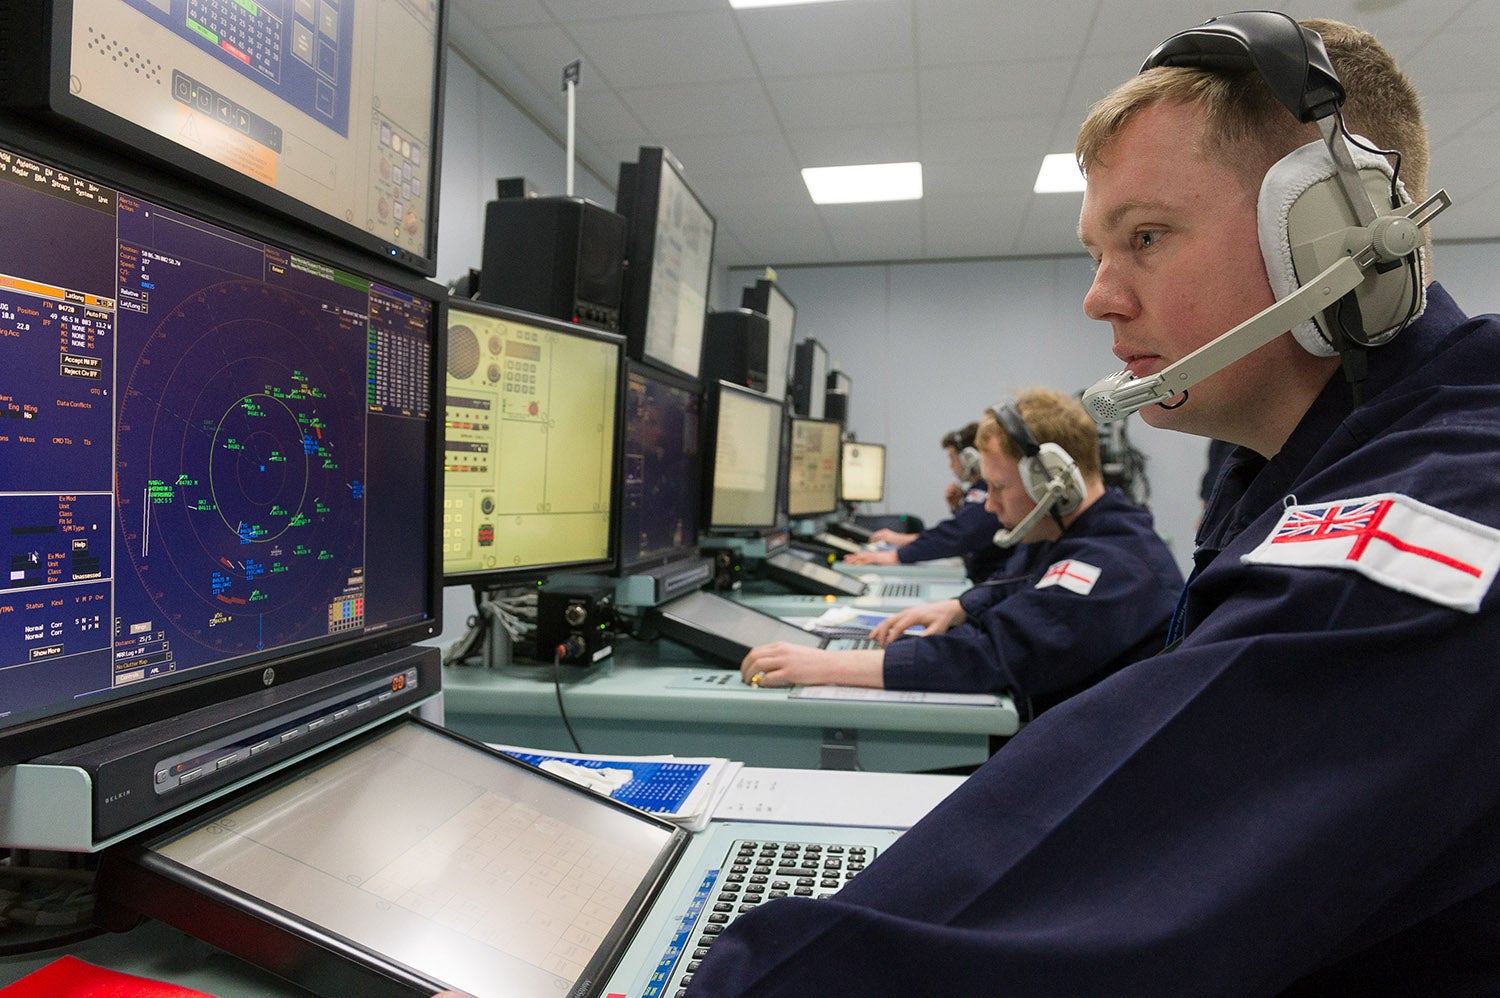 Elbit Systems UK takes over RN’s Maritime Composite Training System